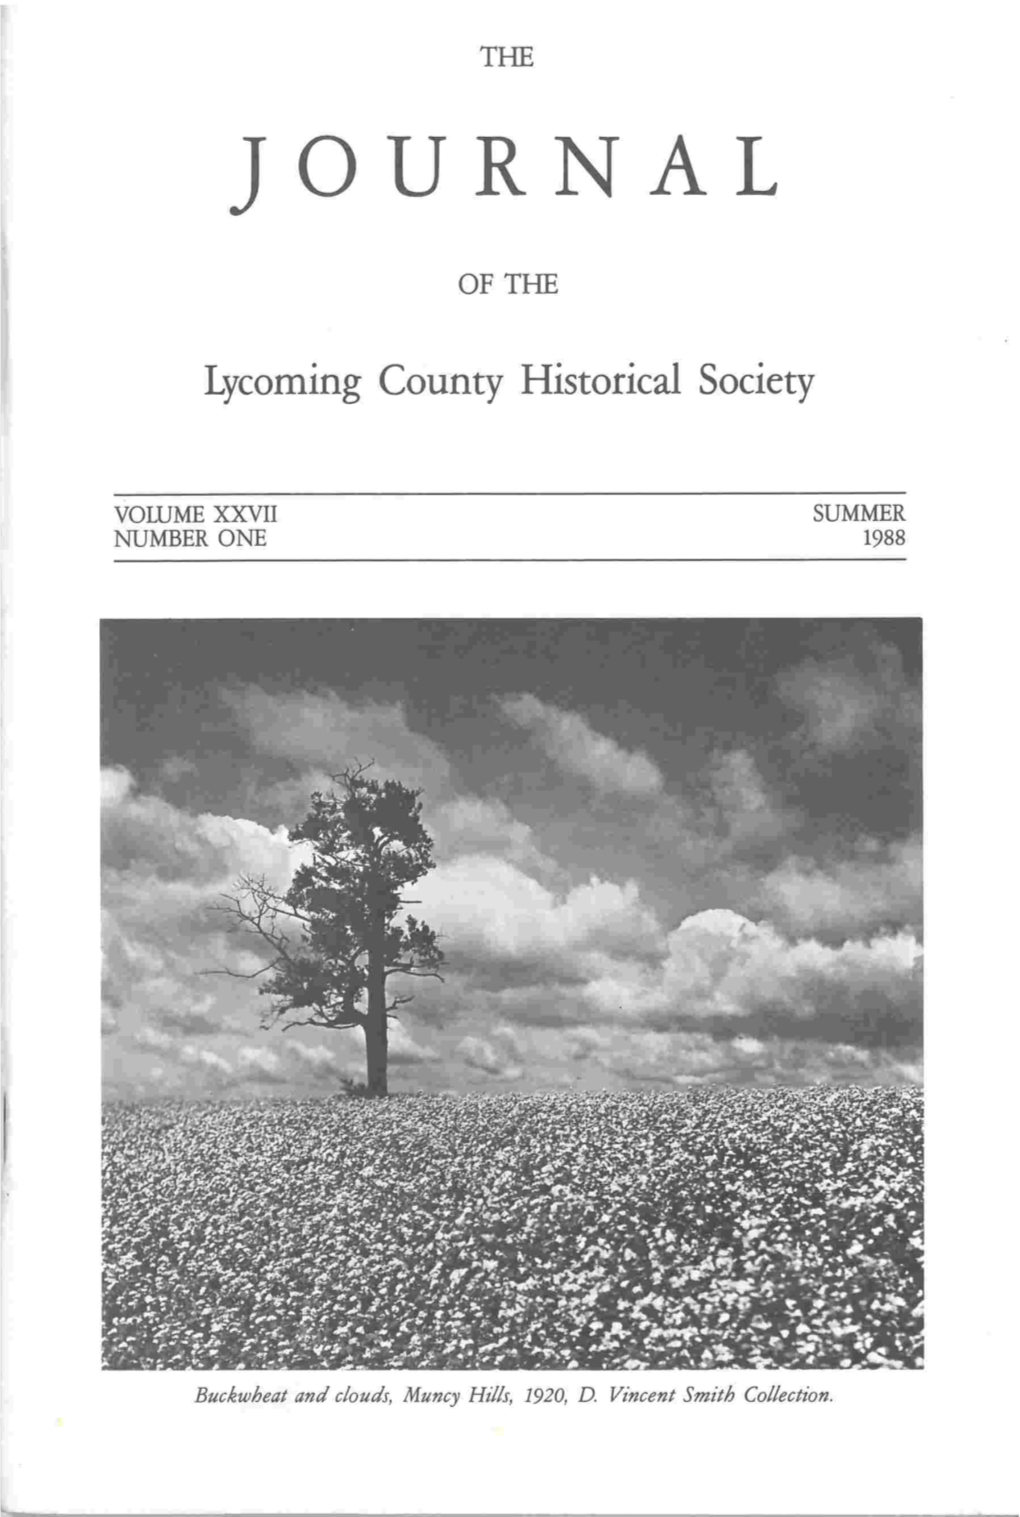 The Journal of the Lycoming County Historical Society, Summer 1988